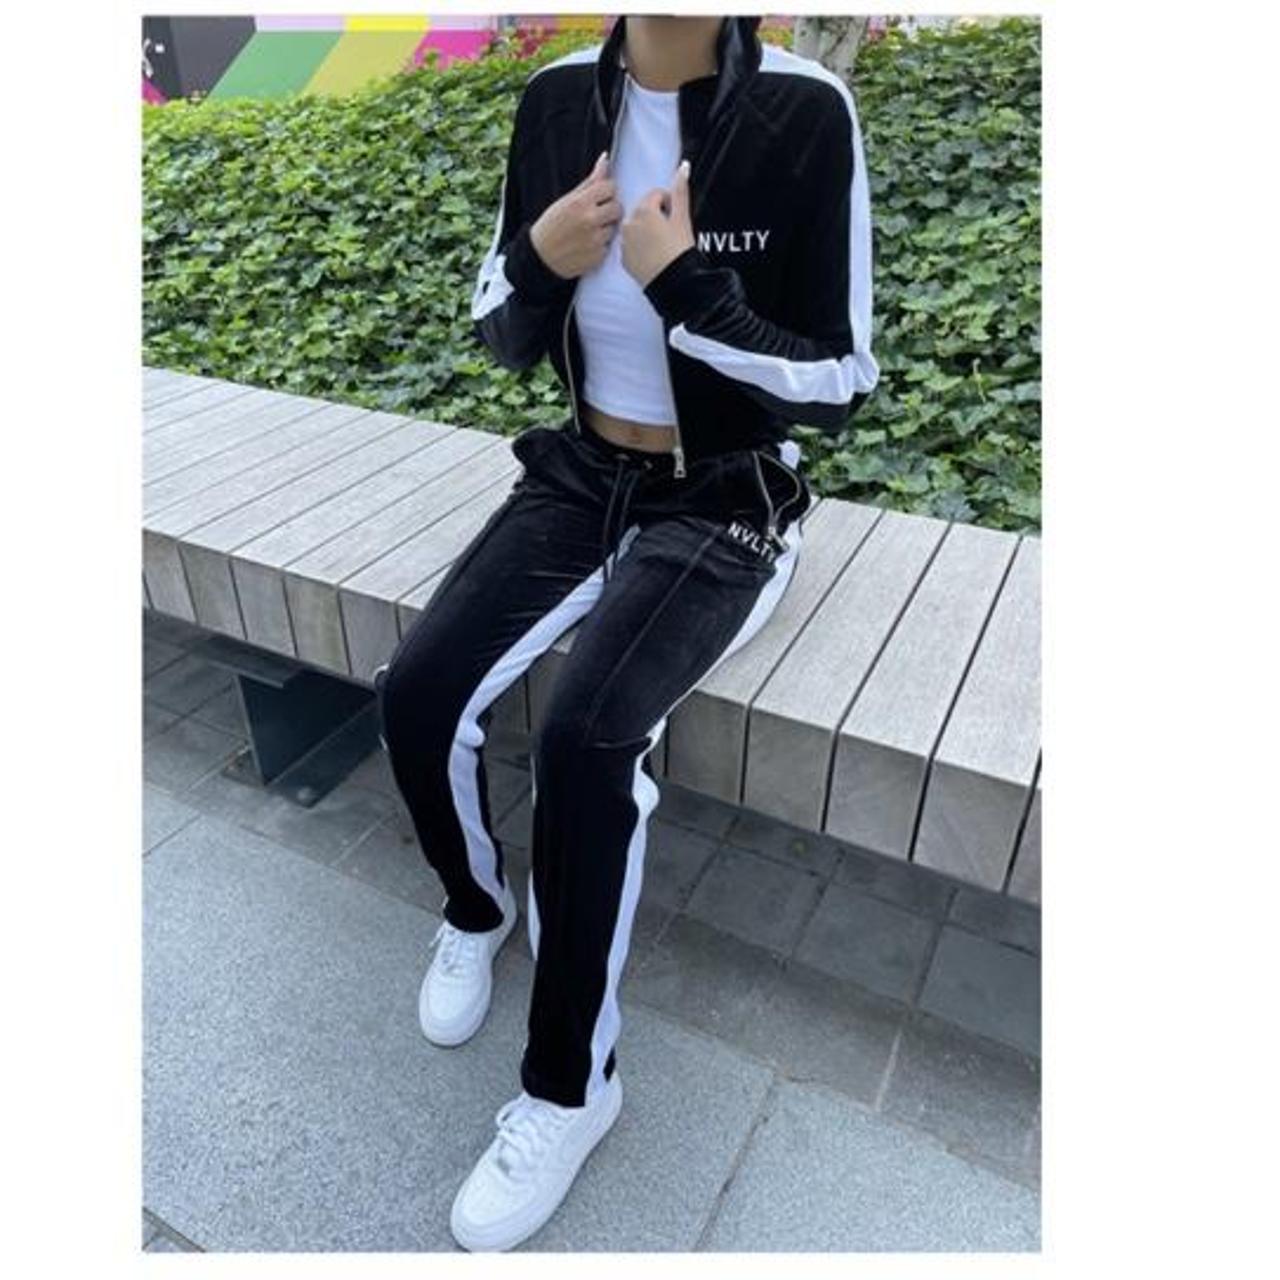 NVLTY tracksuit bought for £50 perfect condition... - Depop